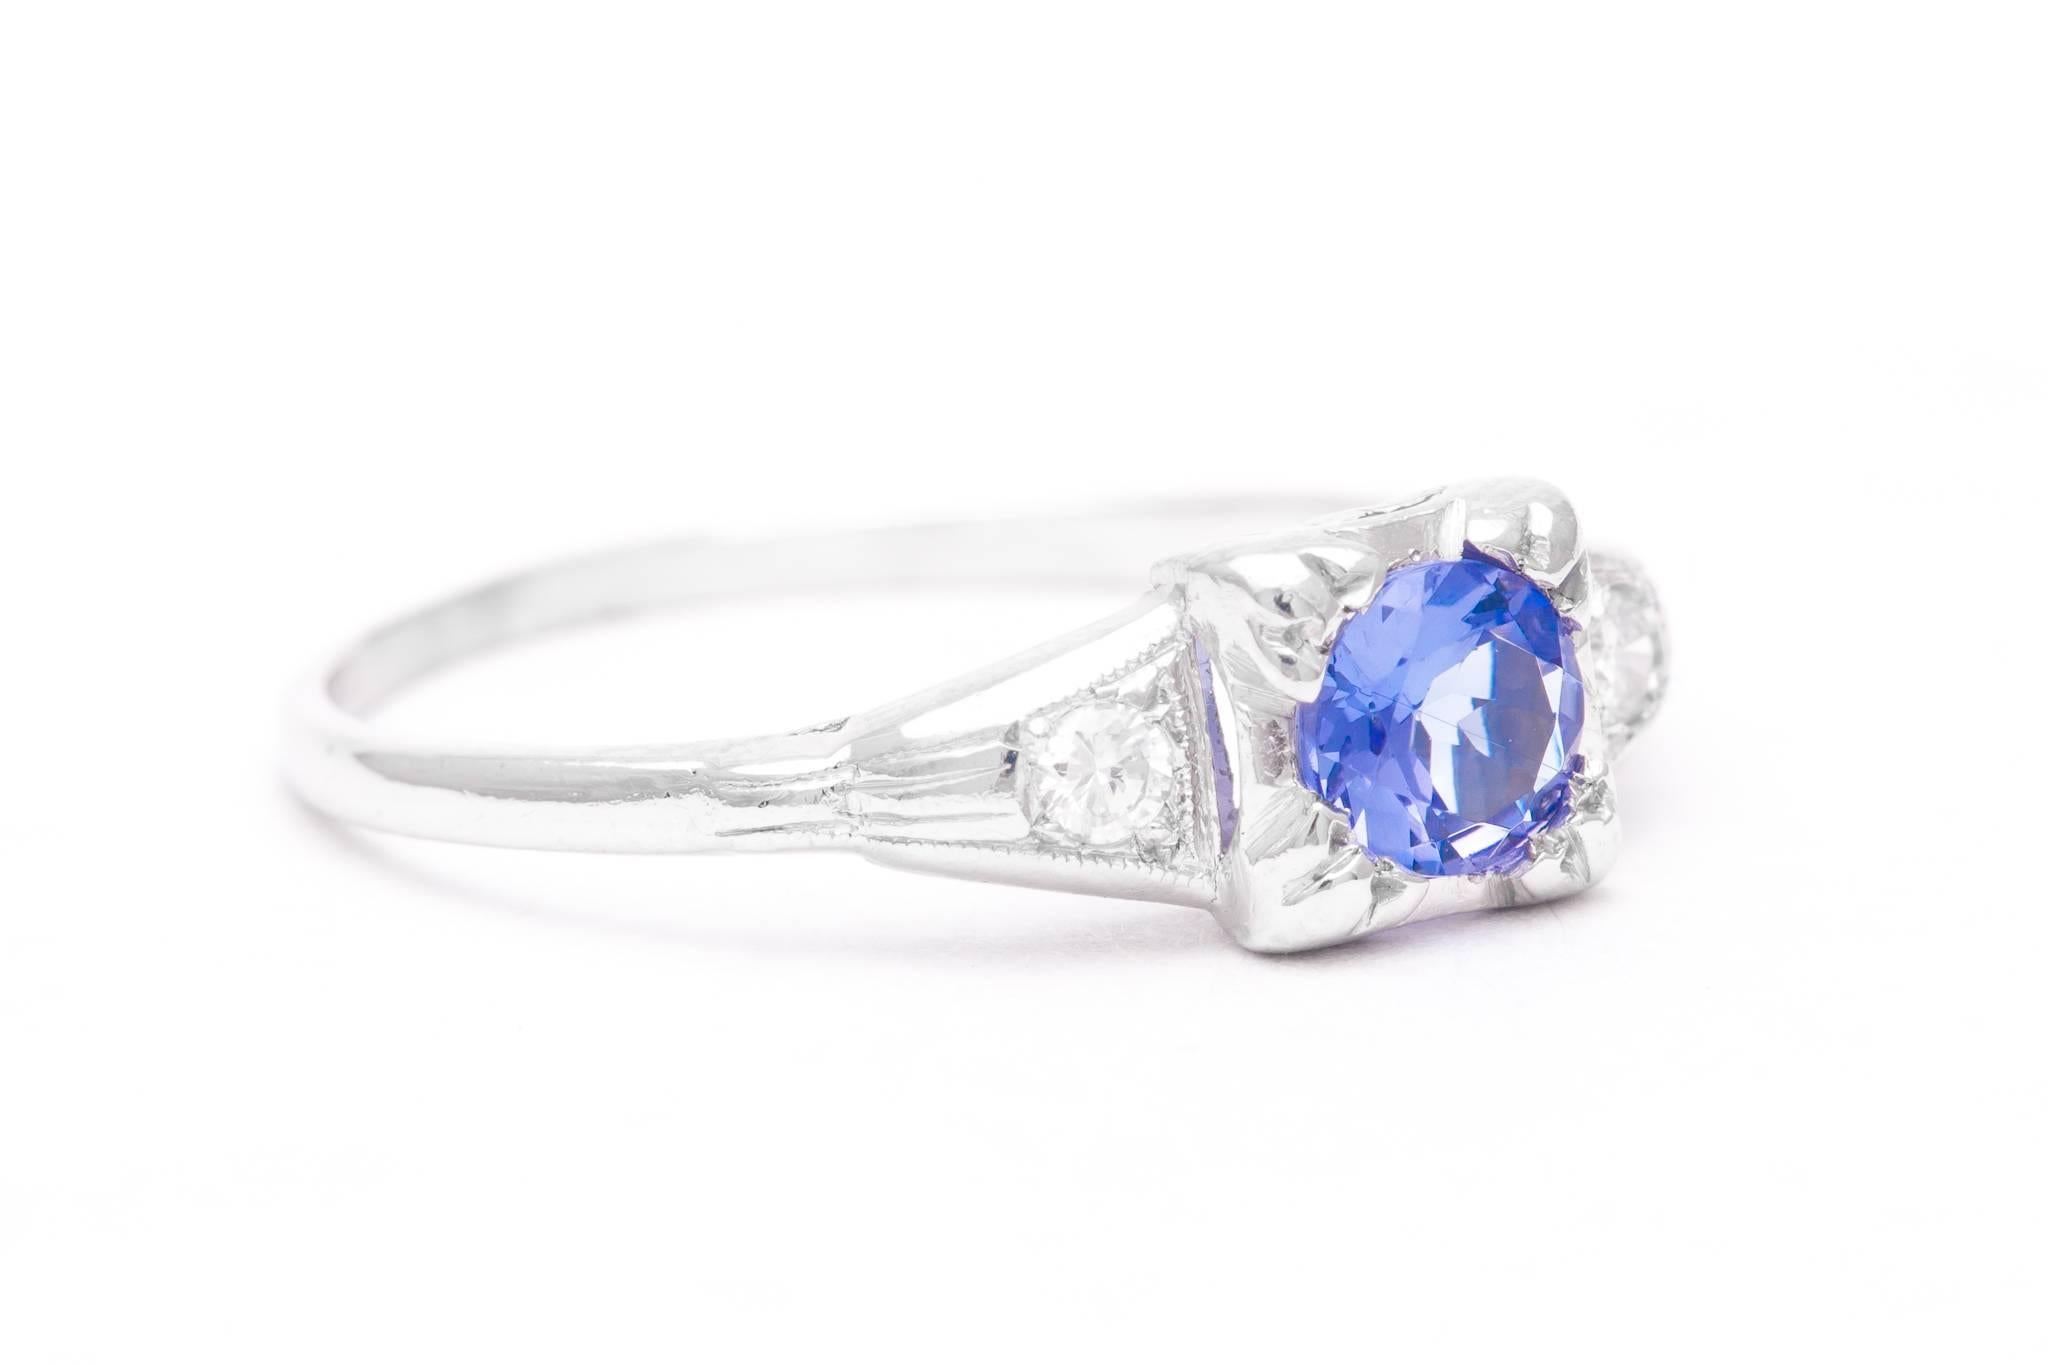 A beautiful art deco period sapphire, and diamond three stone ring in luxurious platinum.  Centered by a 0.50 carat European cut sapphire this ring also features a pair of accenting 0.08 carat total weight European cut diamonds.

Grading as VS